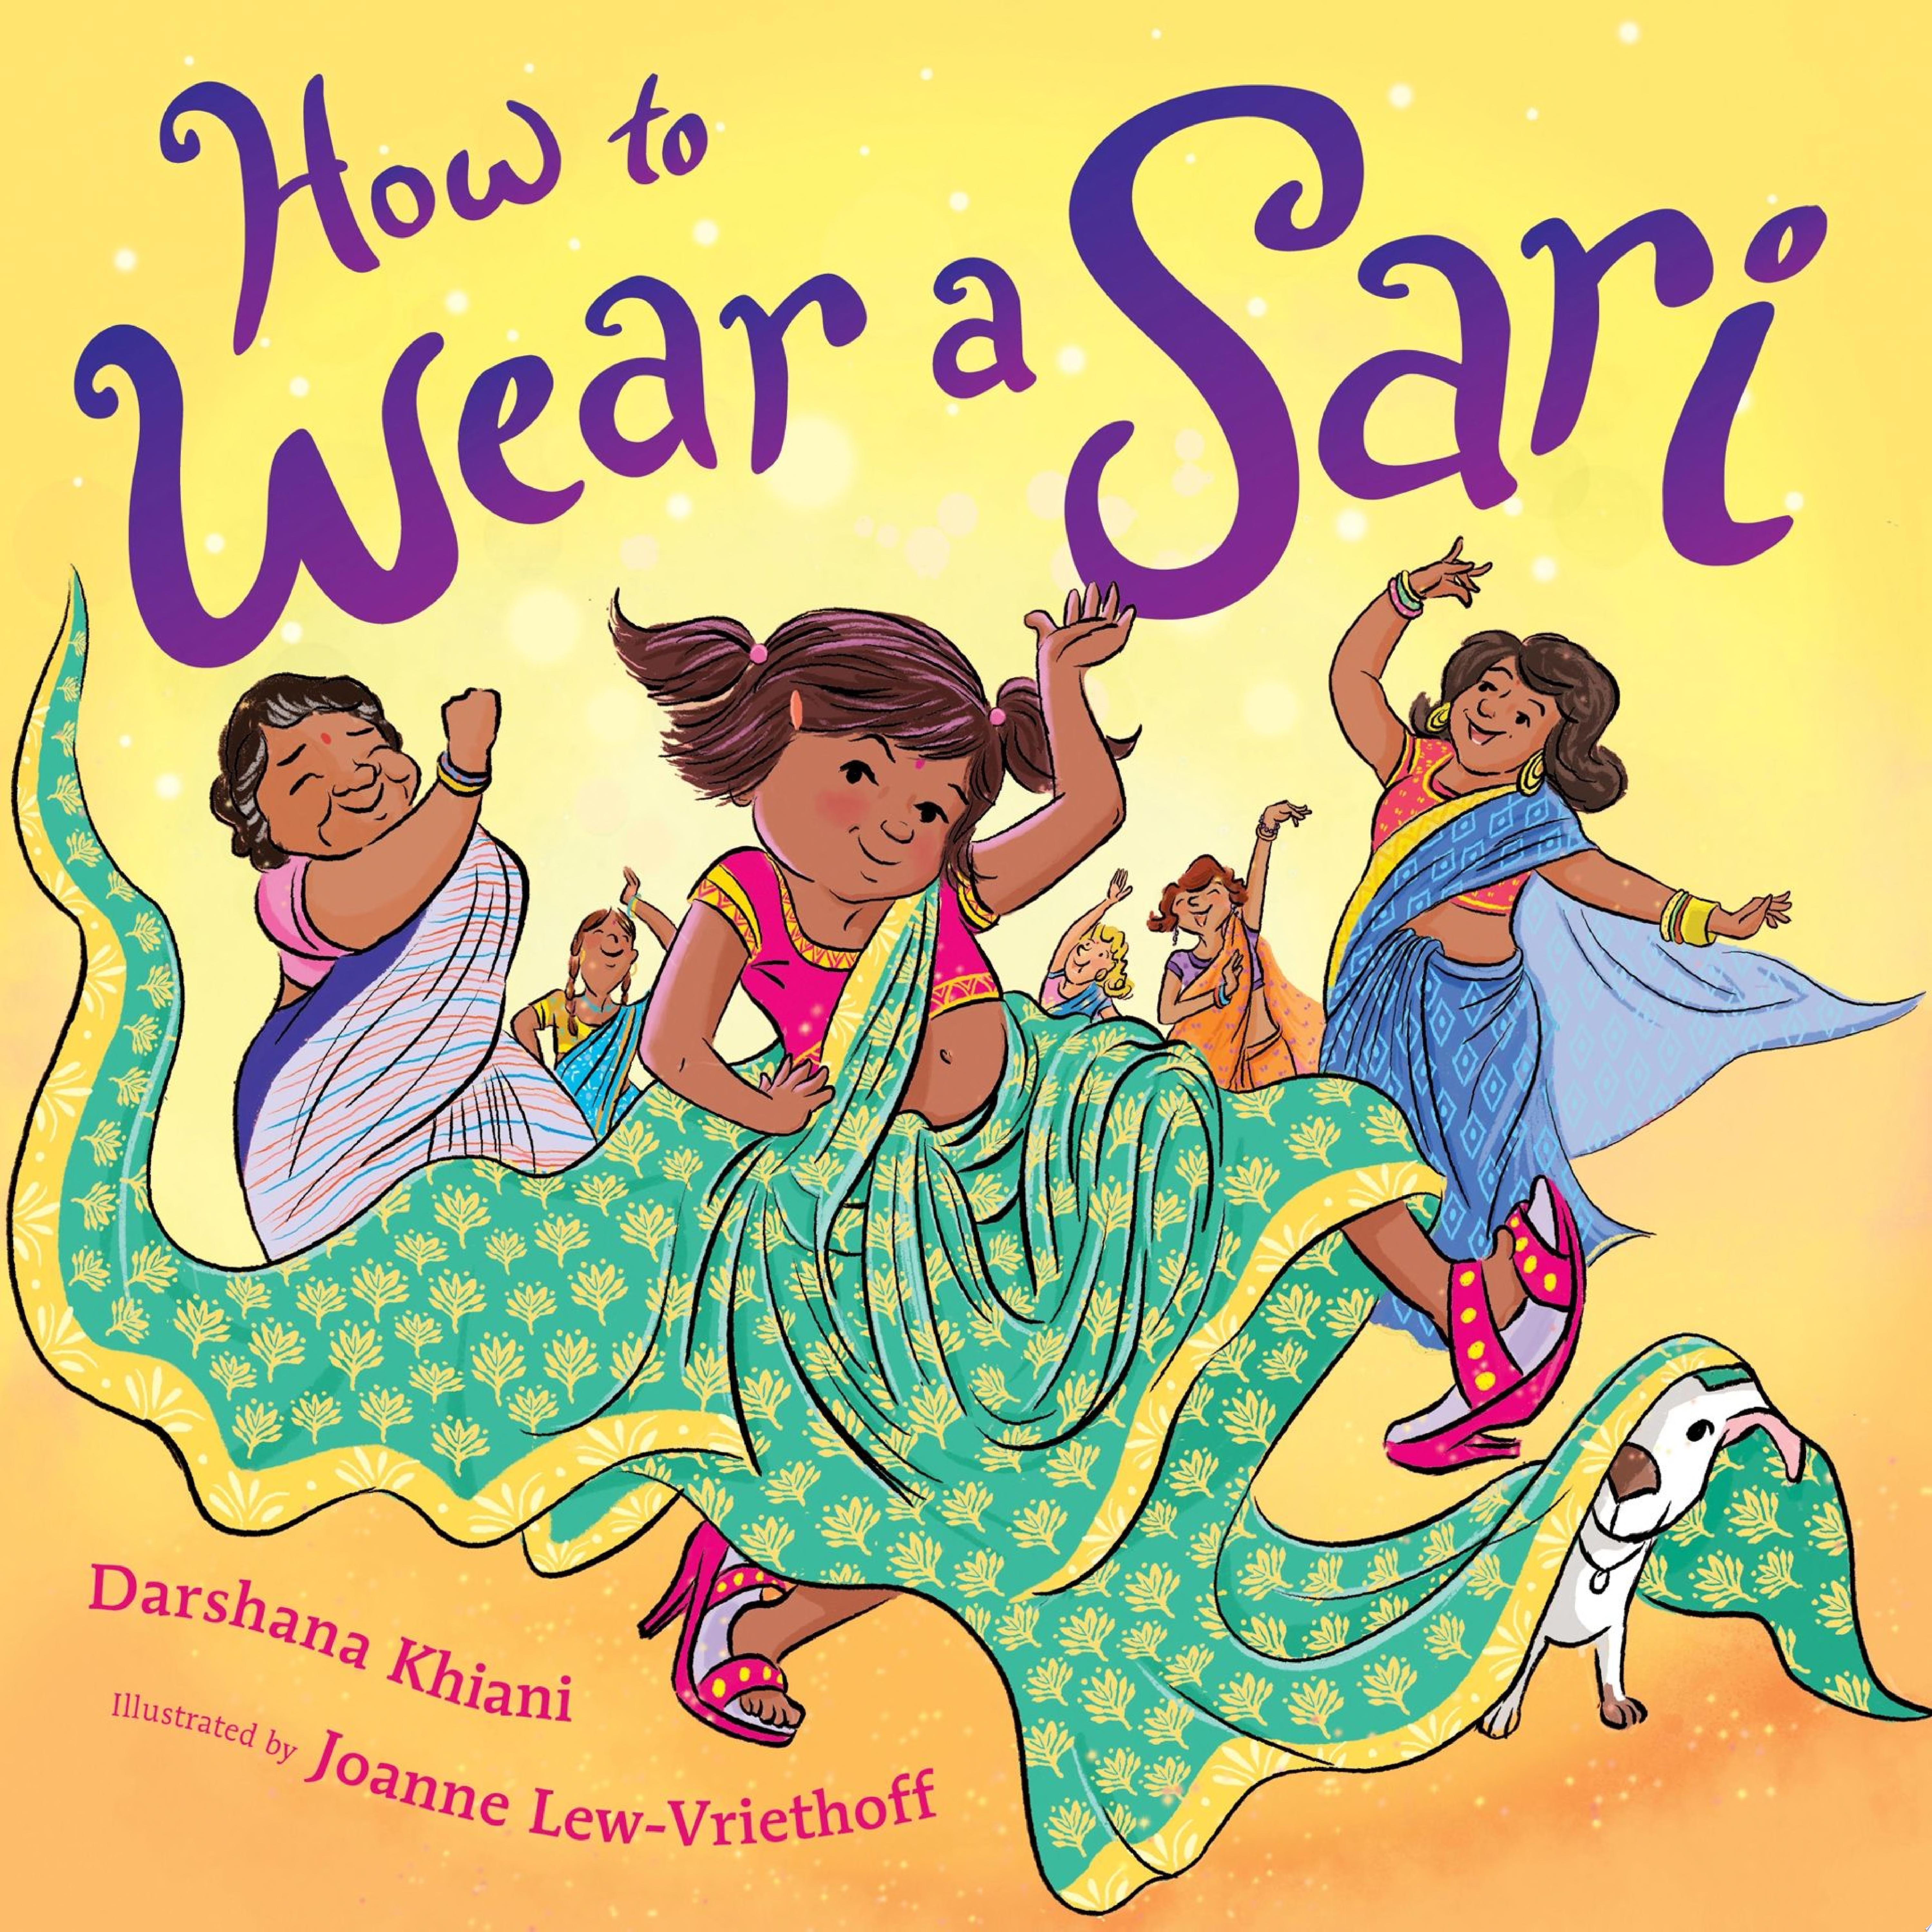 Image for "How to Wear a Sari"